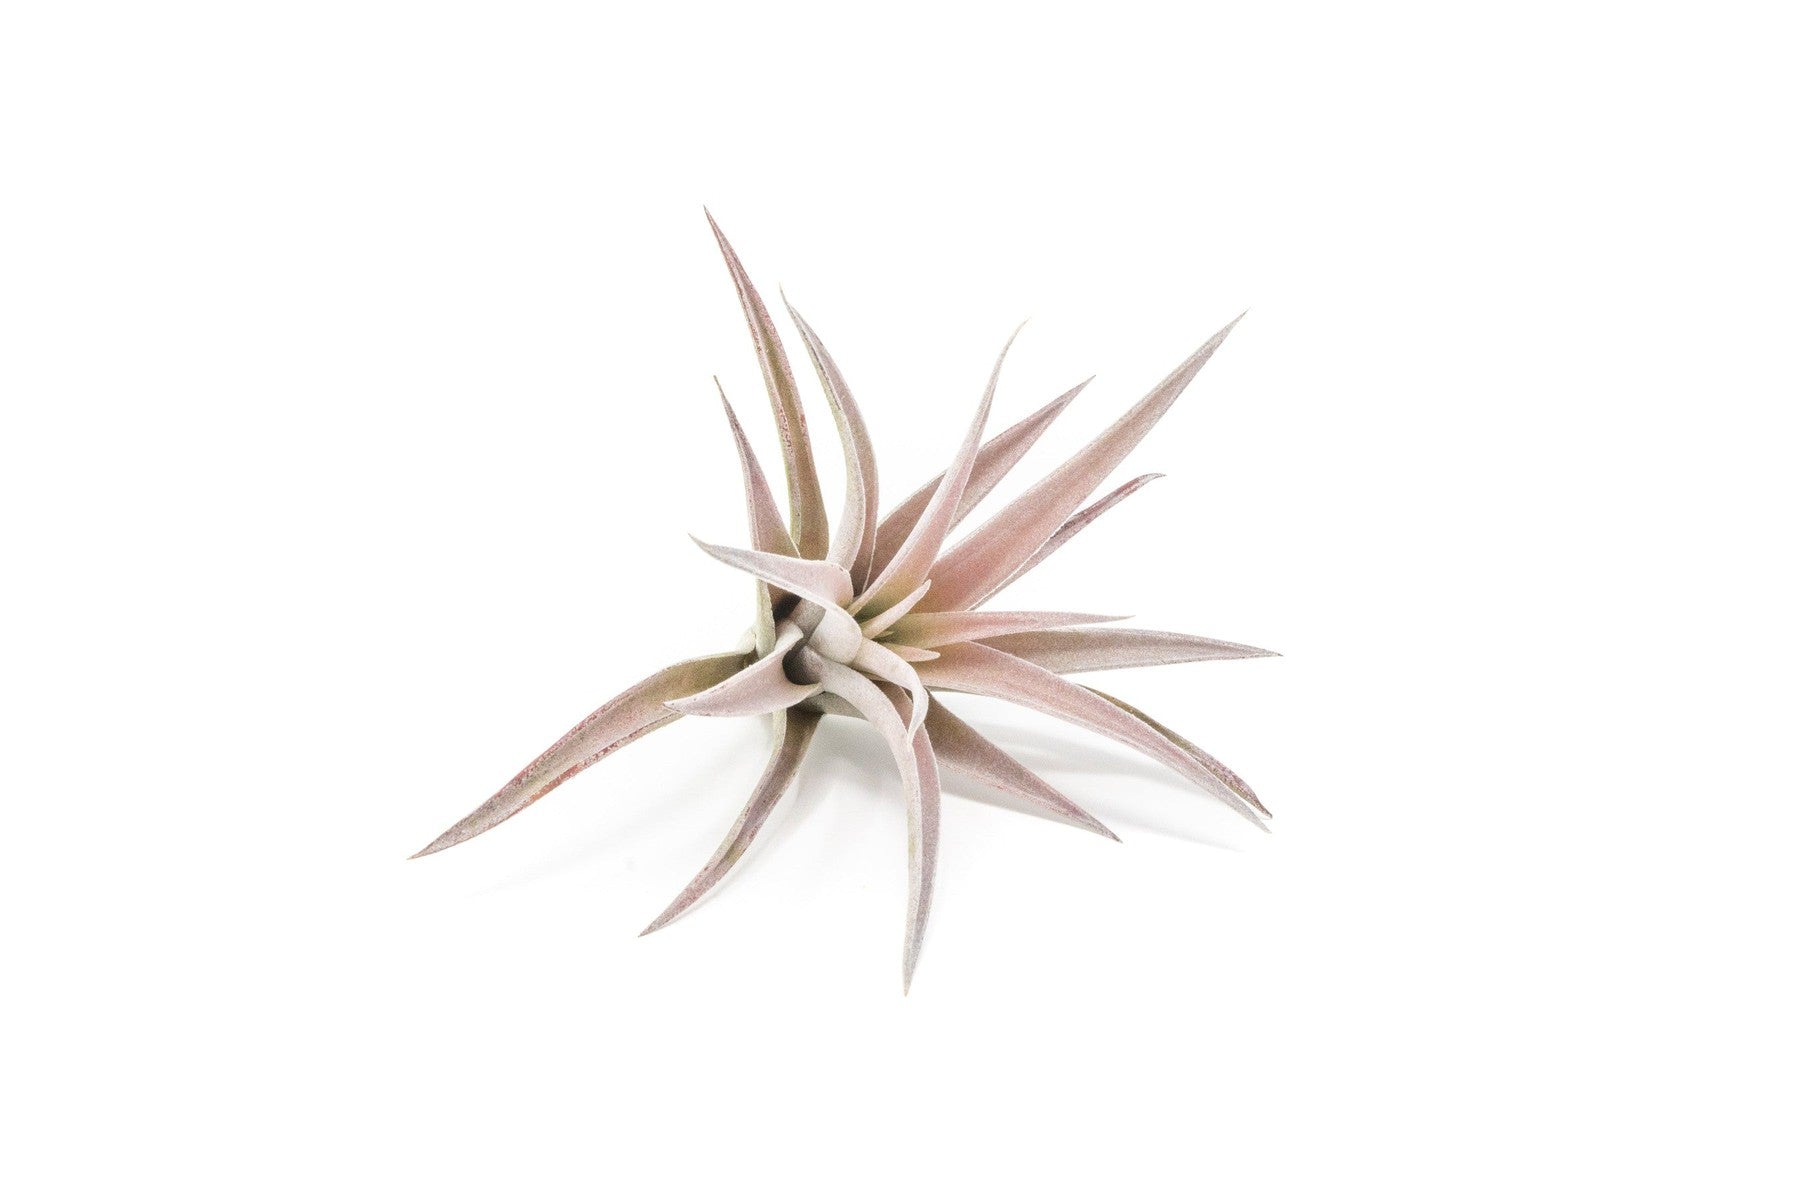 SALE - The Elegant Collection of Tillandsia Air Plants - Set of 10, 20, or 30 - 60% Off-airplant-The Succulent Source